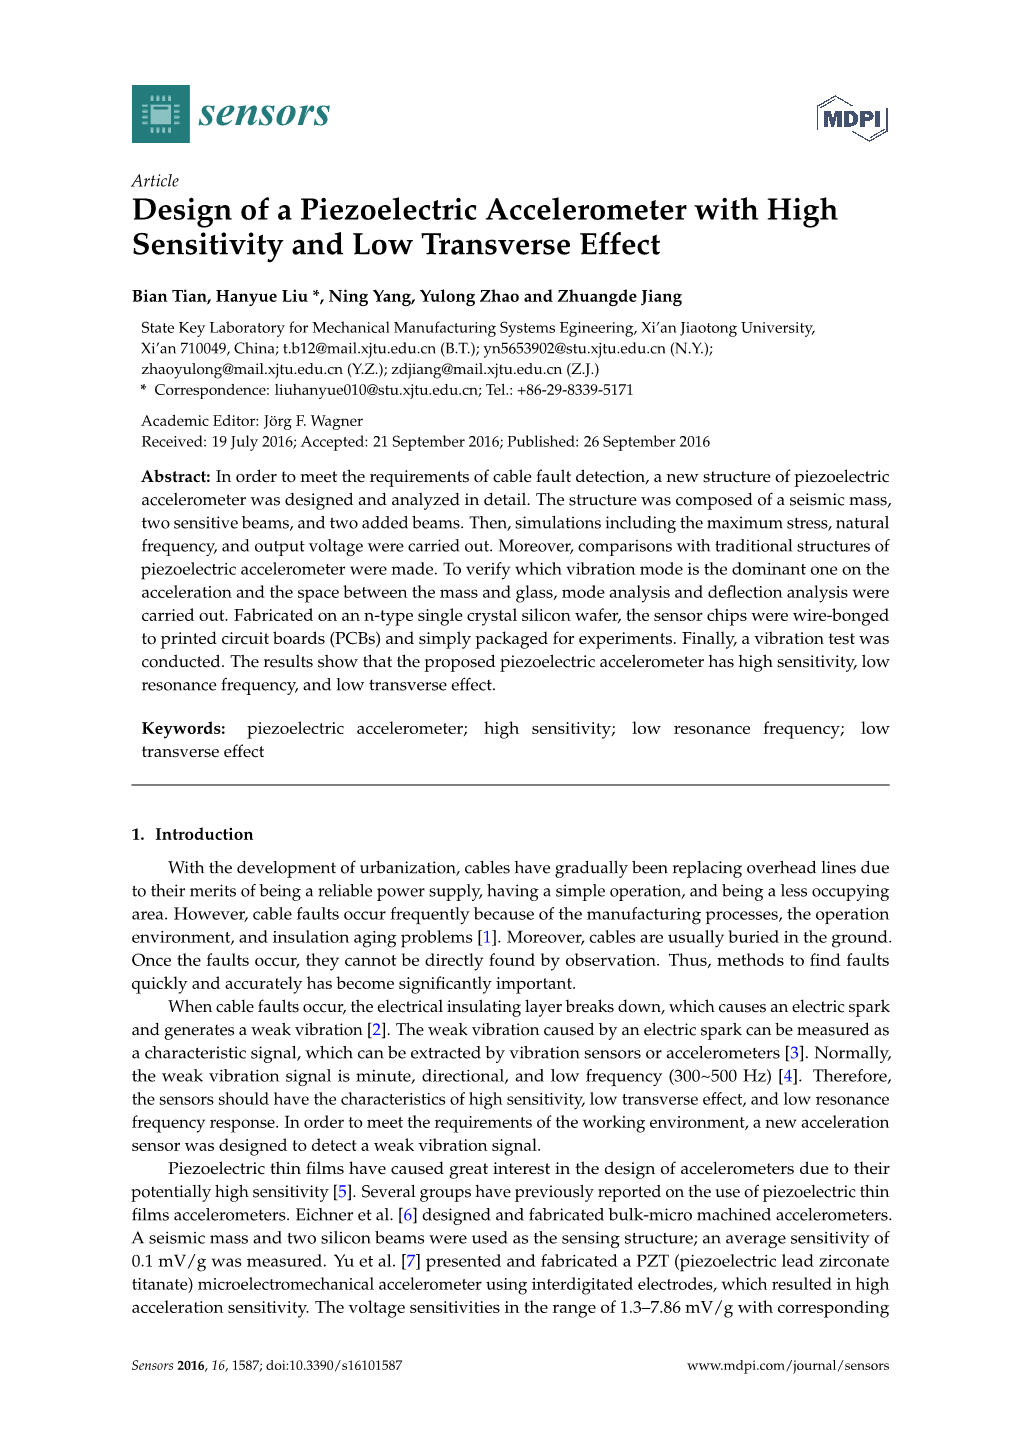 Design of a Piezoelectric Accelerometer with High Sensitivity and Low Transverse Effect